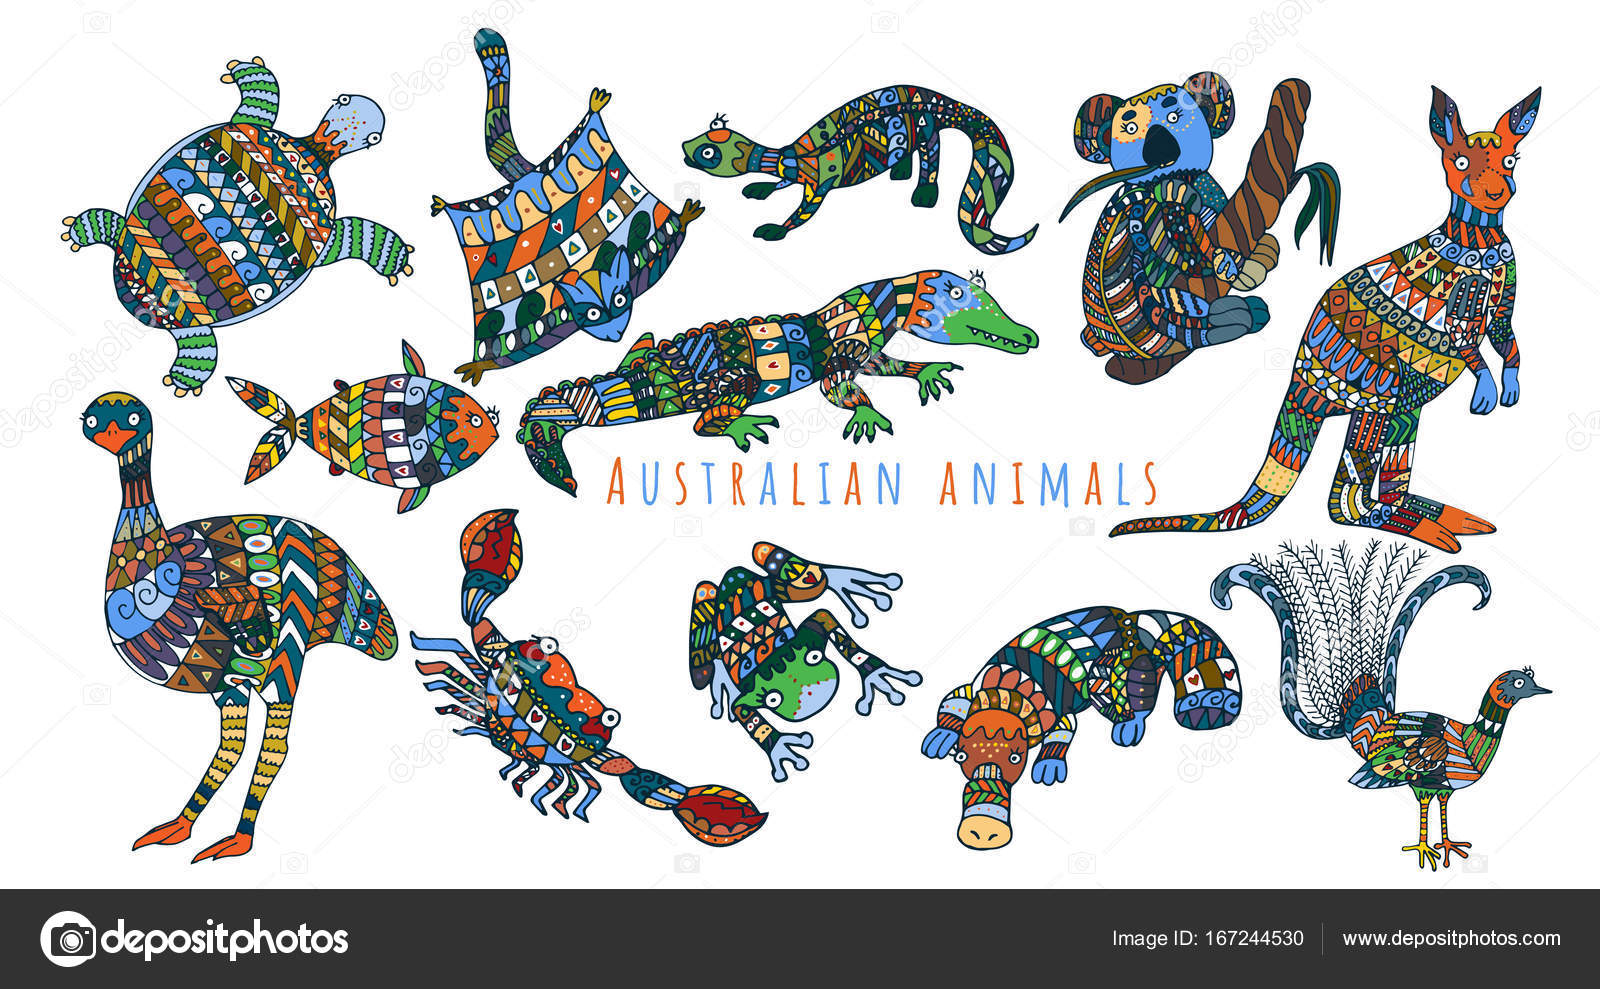 animals, Royalty-free Vector Images & Drawings Depositphotos®